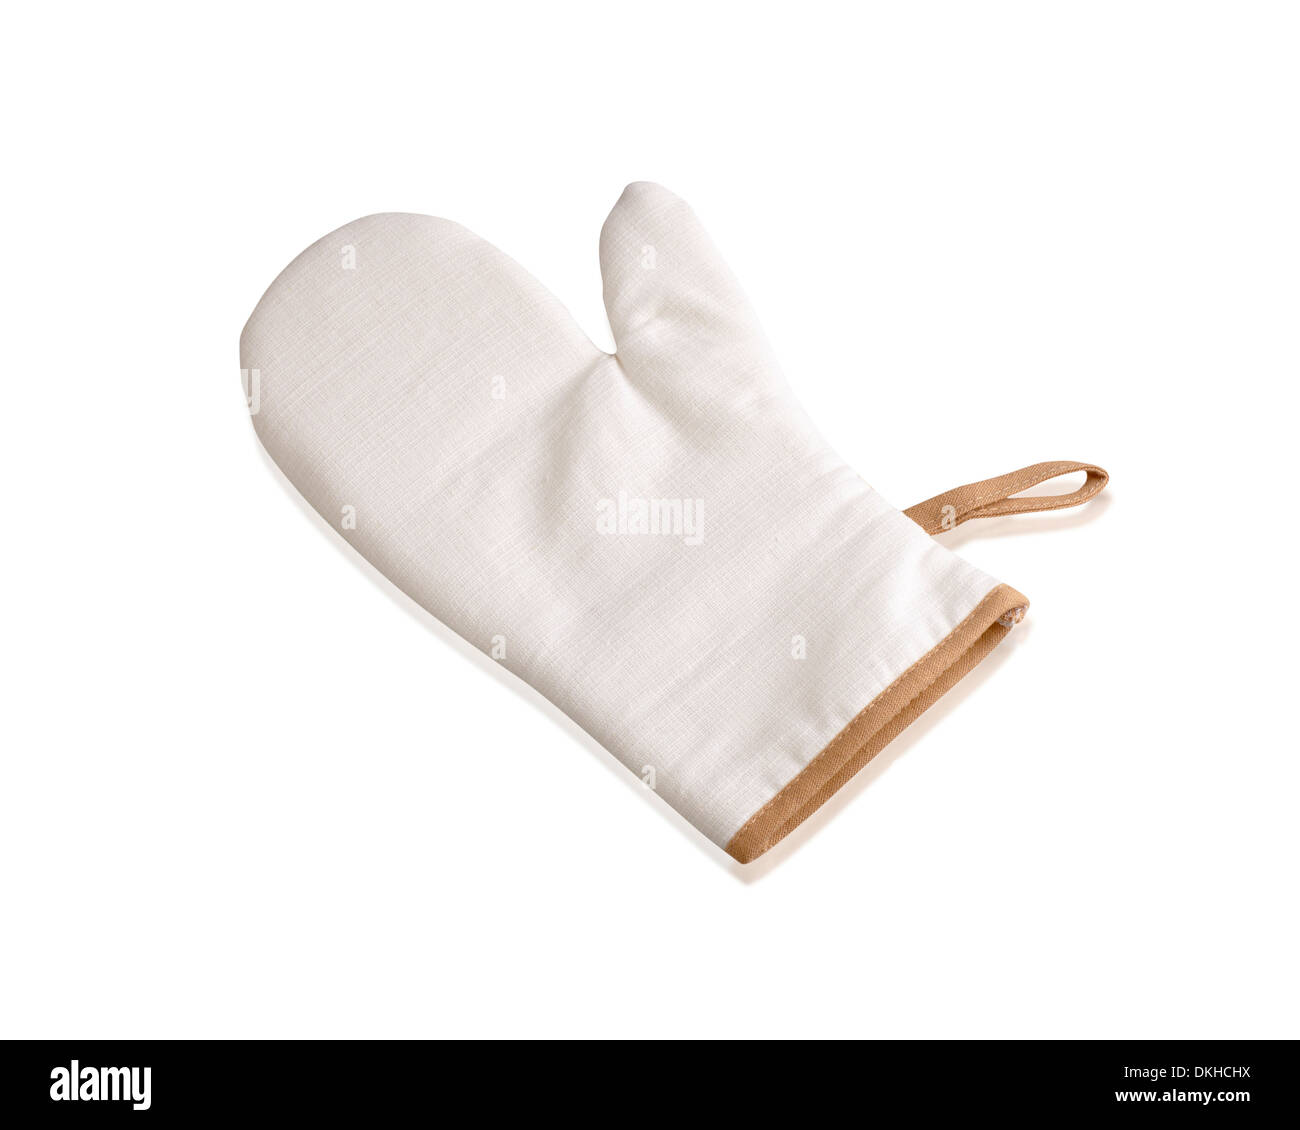 Kitchen protective glove isolated on white background Stock Photo